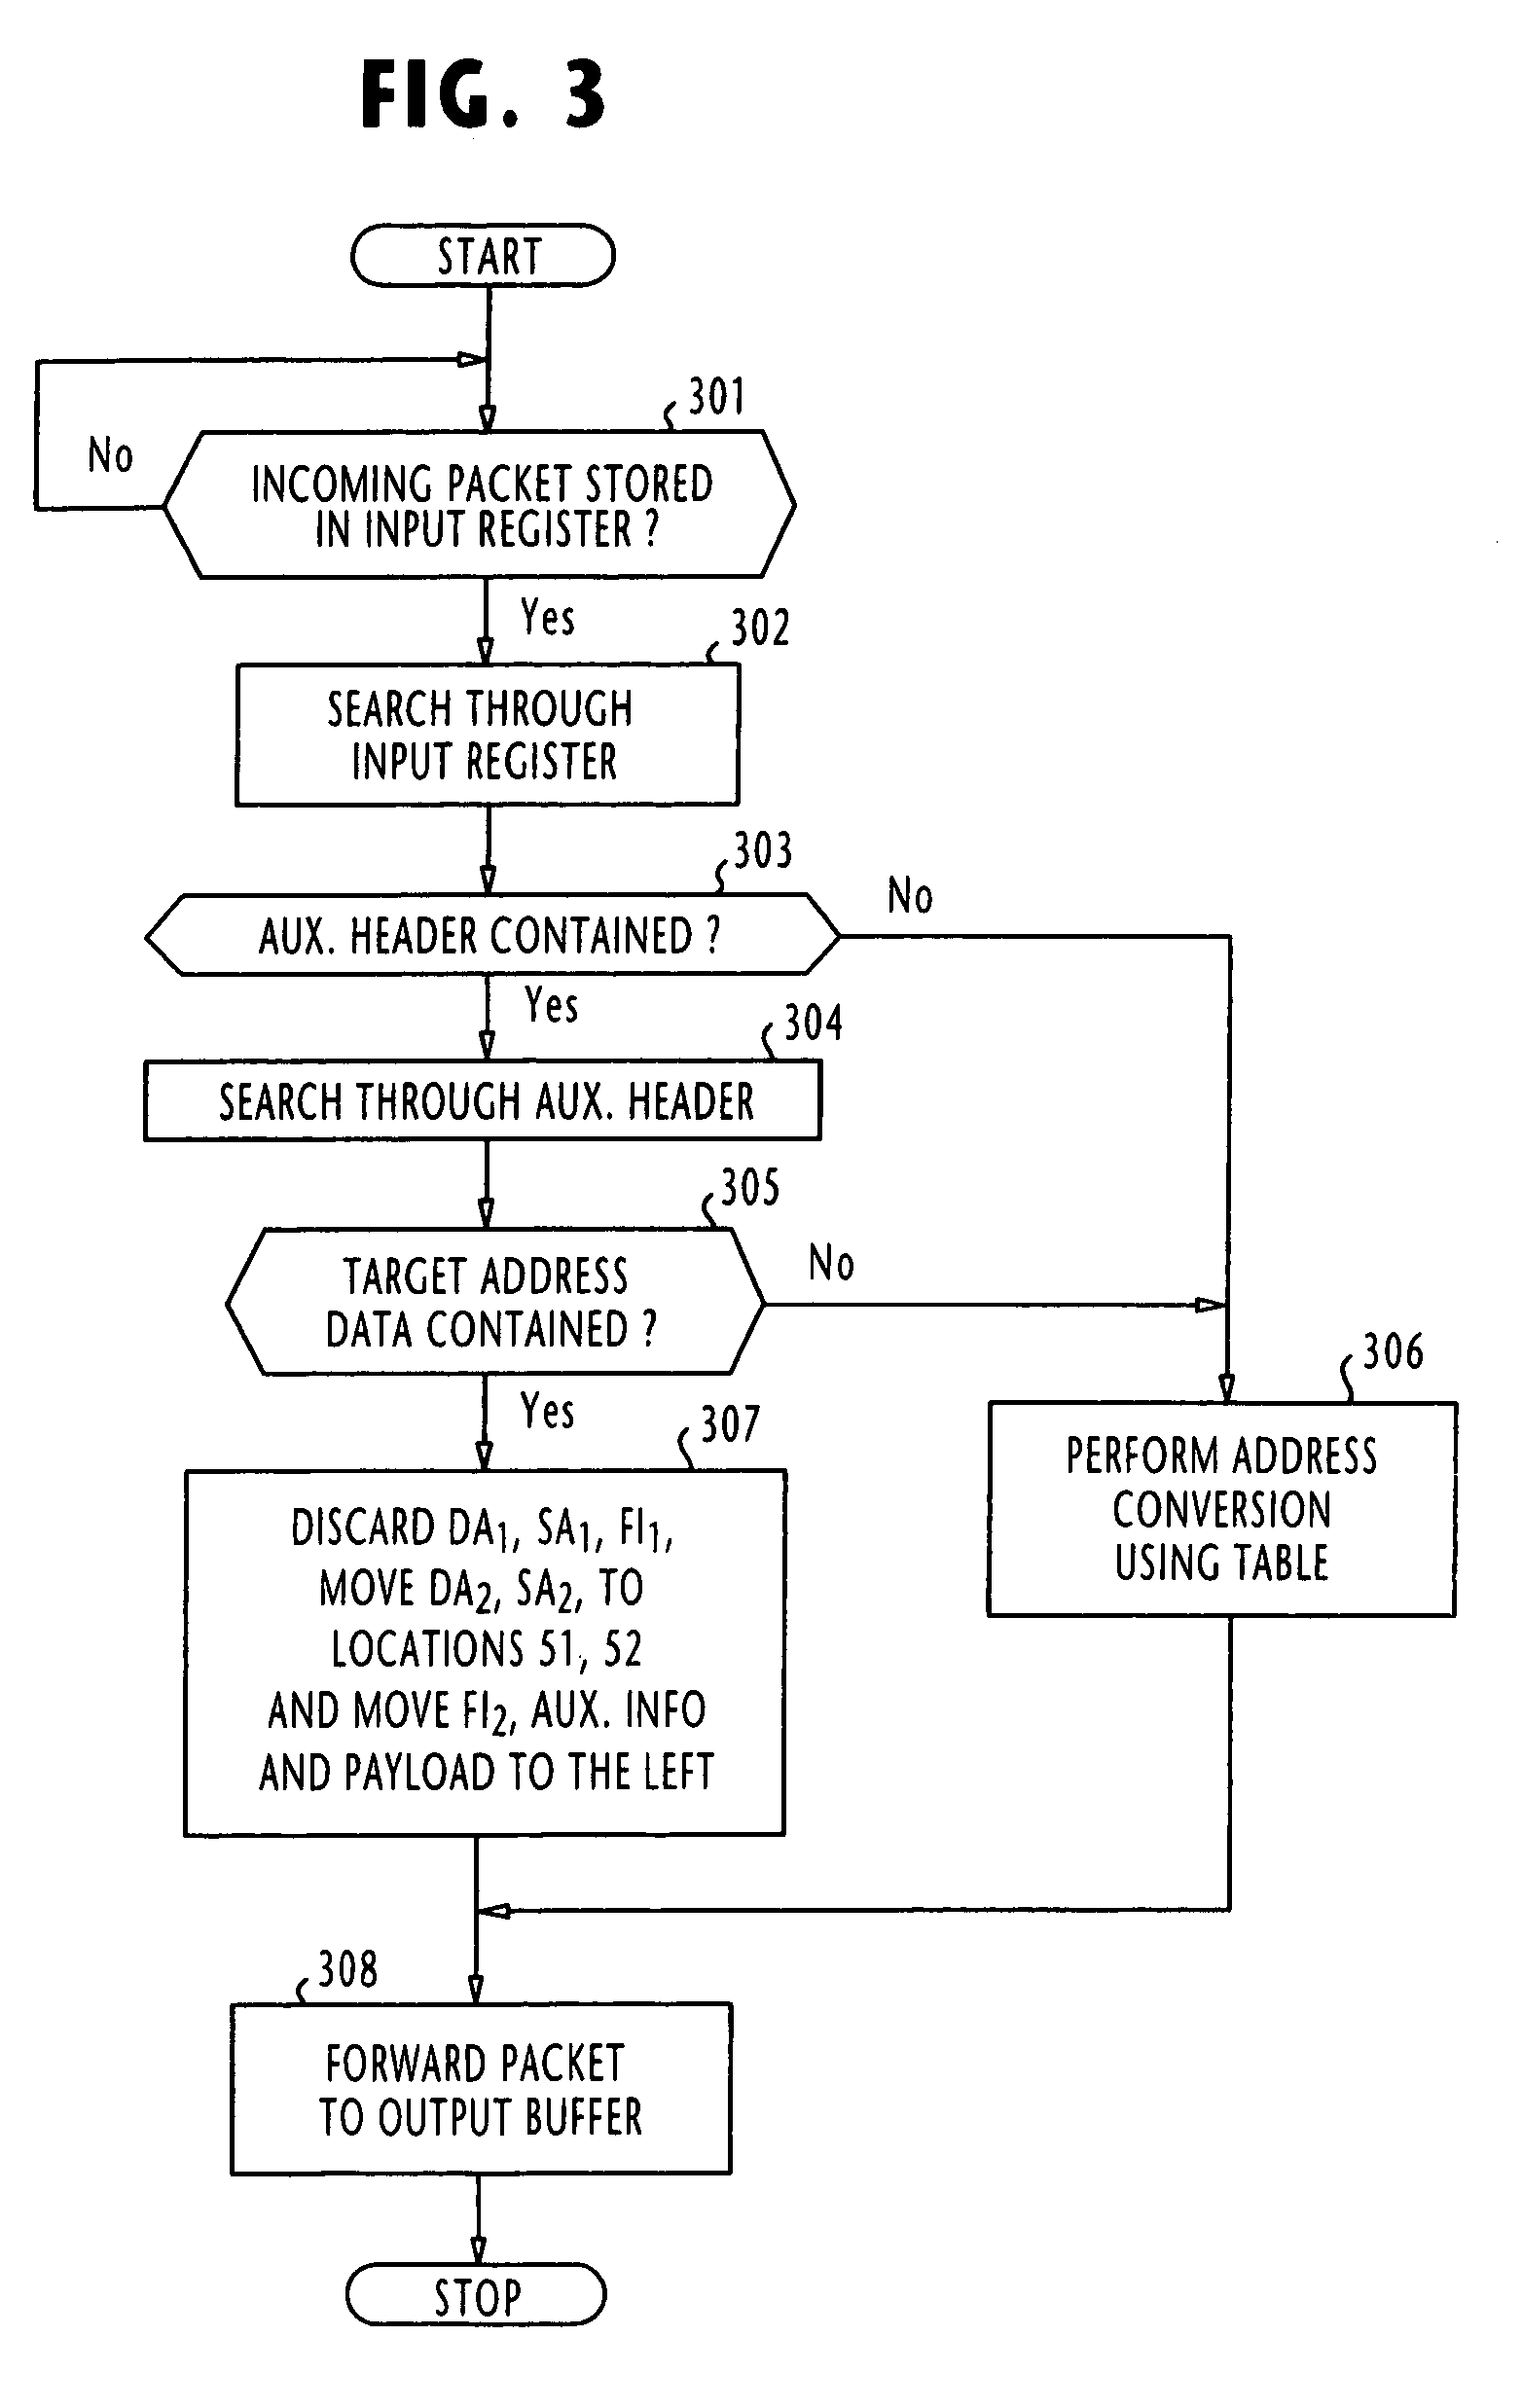 Address converter for gateways interconnecting networks of different address formats